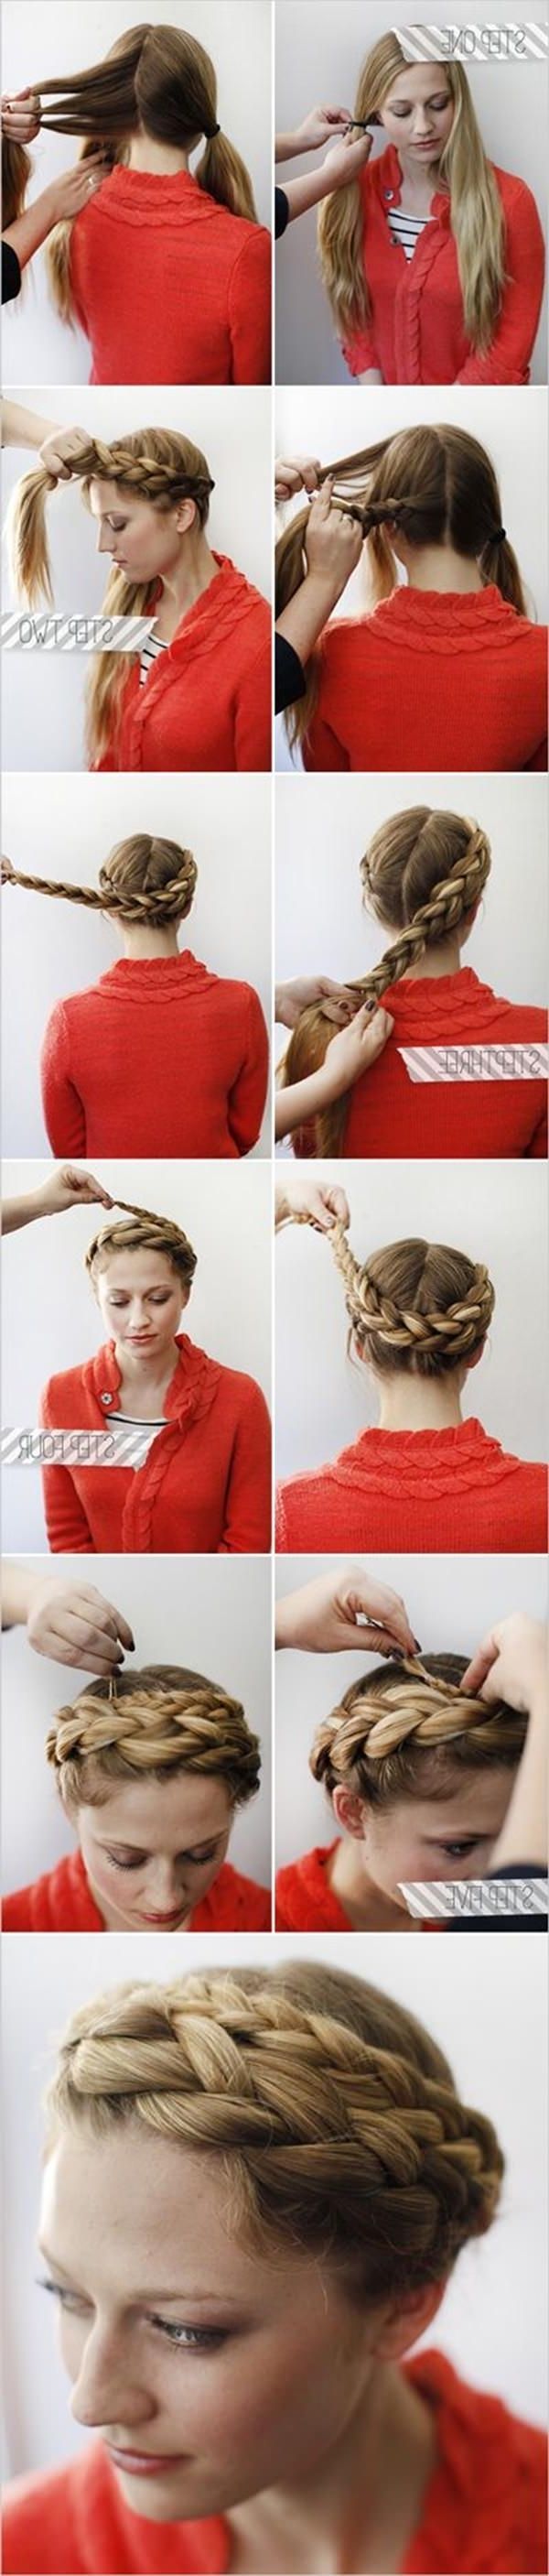 Most Recent Thick Halo Braid Hairstyles Pertaining To 66 Stunning Halo Braid Ideas That You Will Love (View 15 of 15)